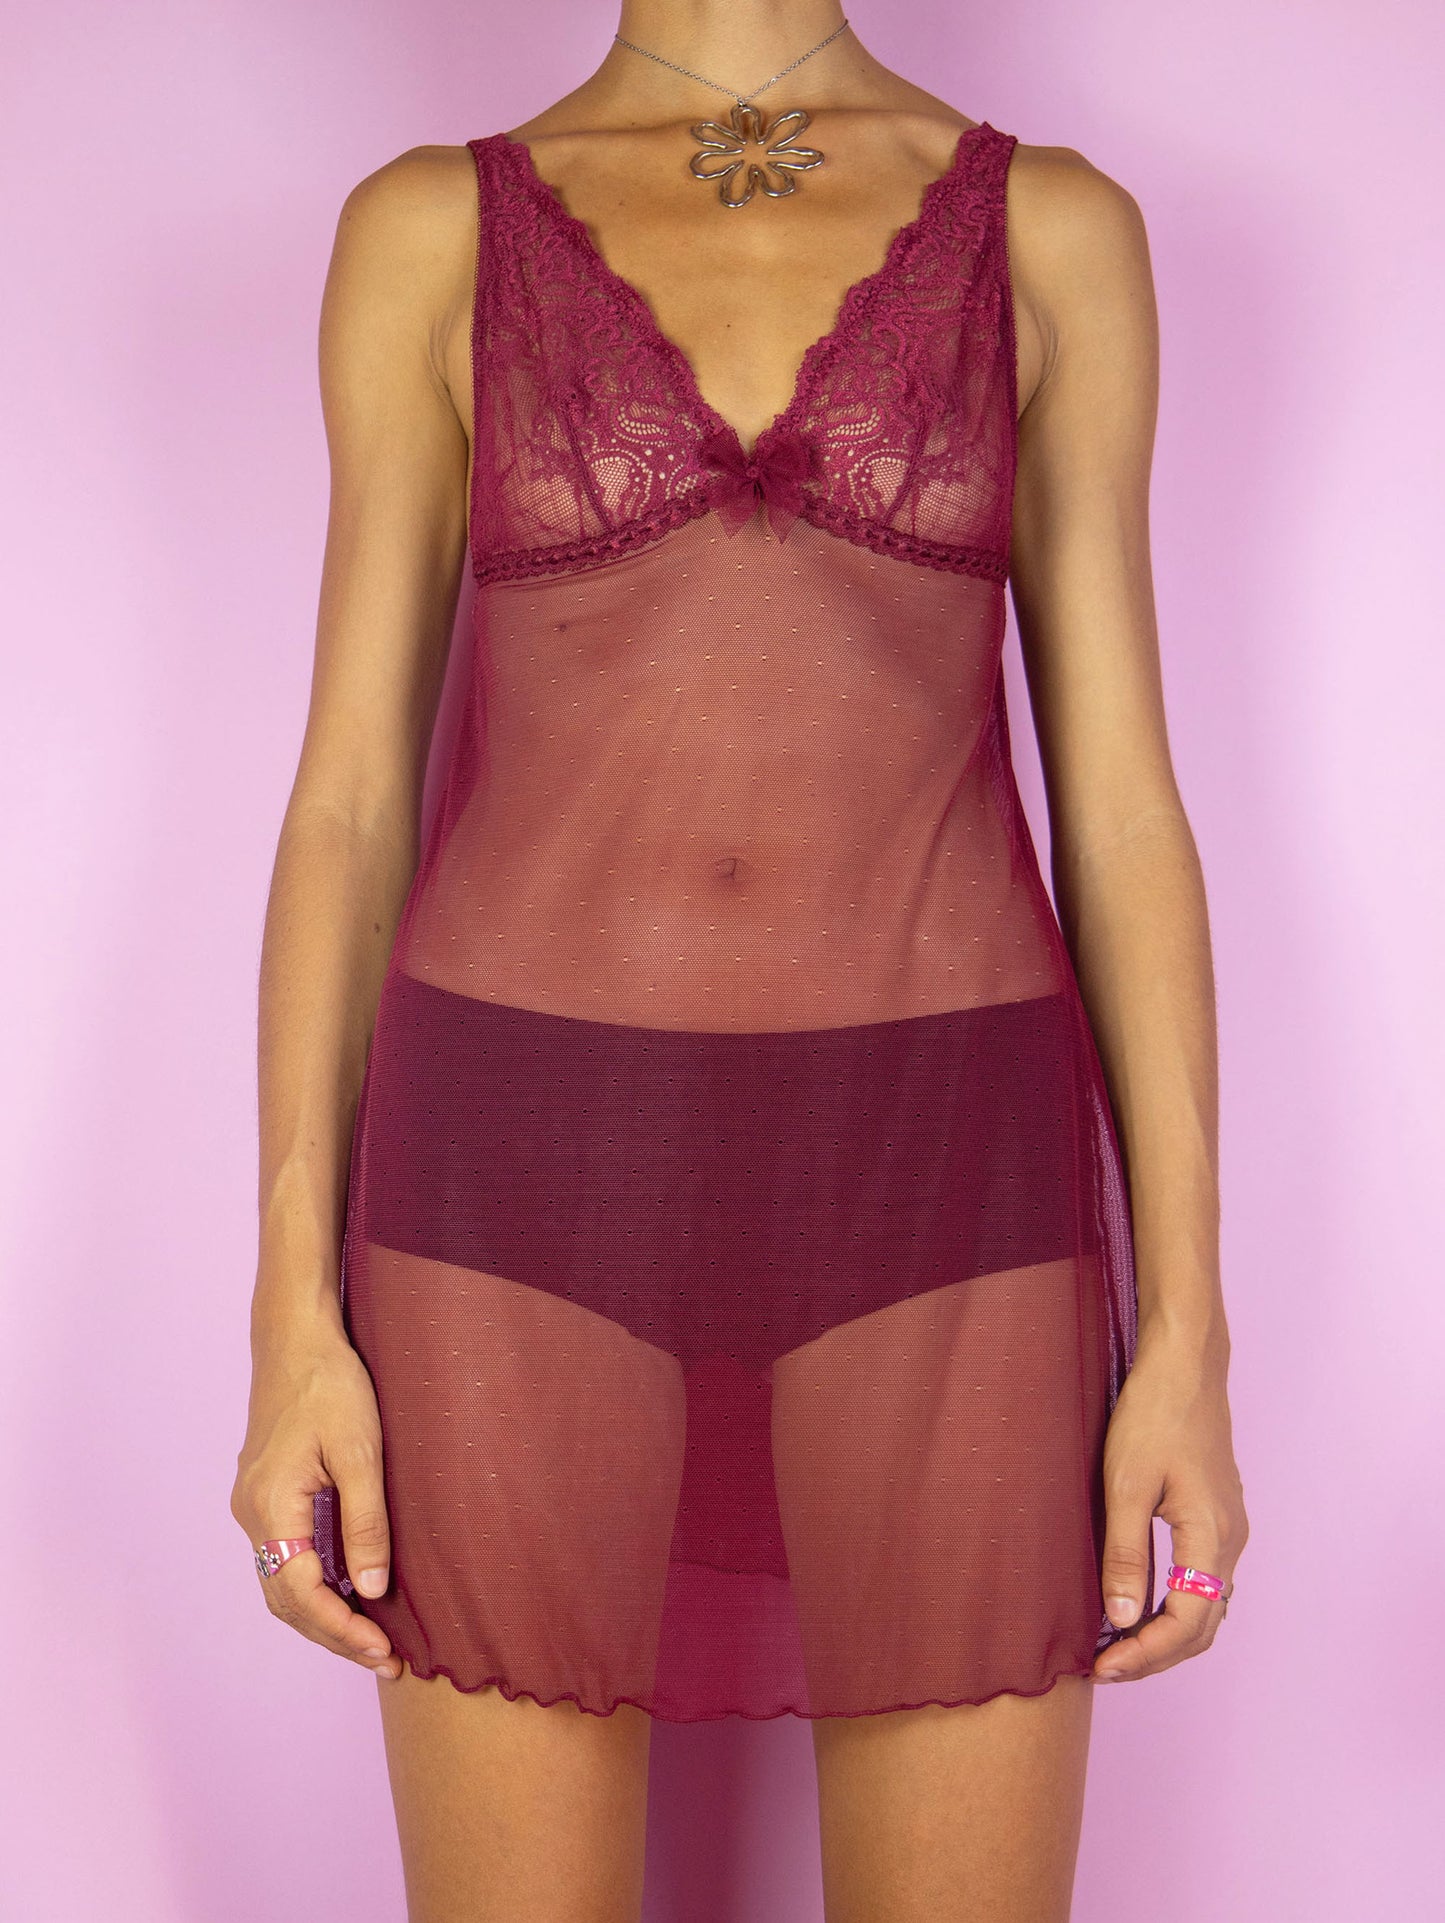 The Y2K Maroon Mesh Slip Dress is a vintage burgundy red mini cami dress made of semi-sheer mesh and lace with adjustable straps. Romantic sexy coquette 2000s lingerie night dress.